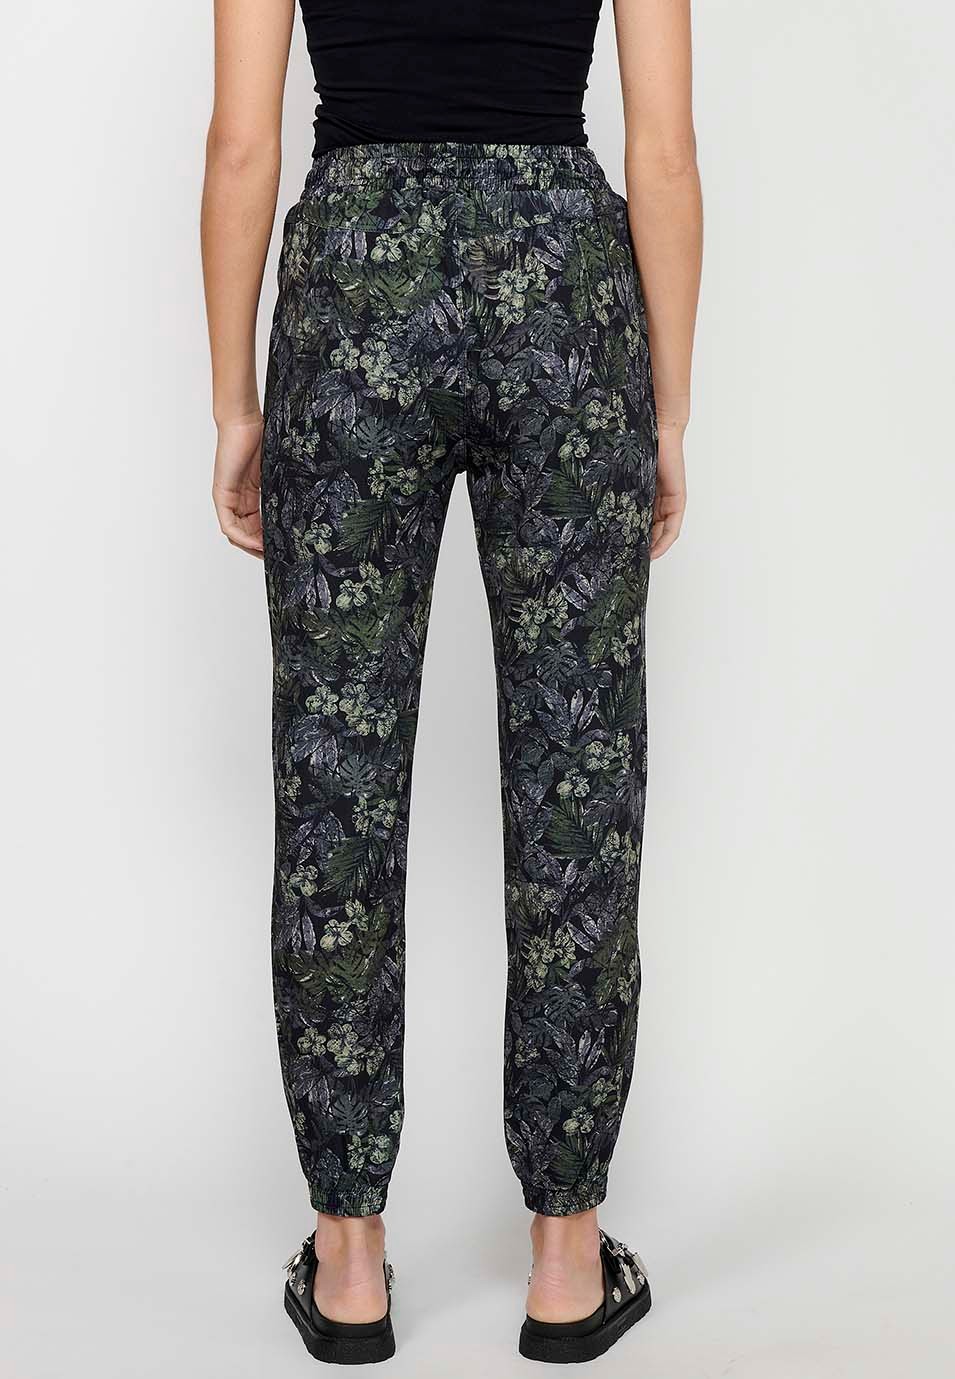 Long jogging pants fitted at the ankles with elasticated waistband with drawstring and Khaki floral print for Women 3